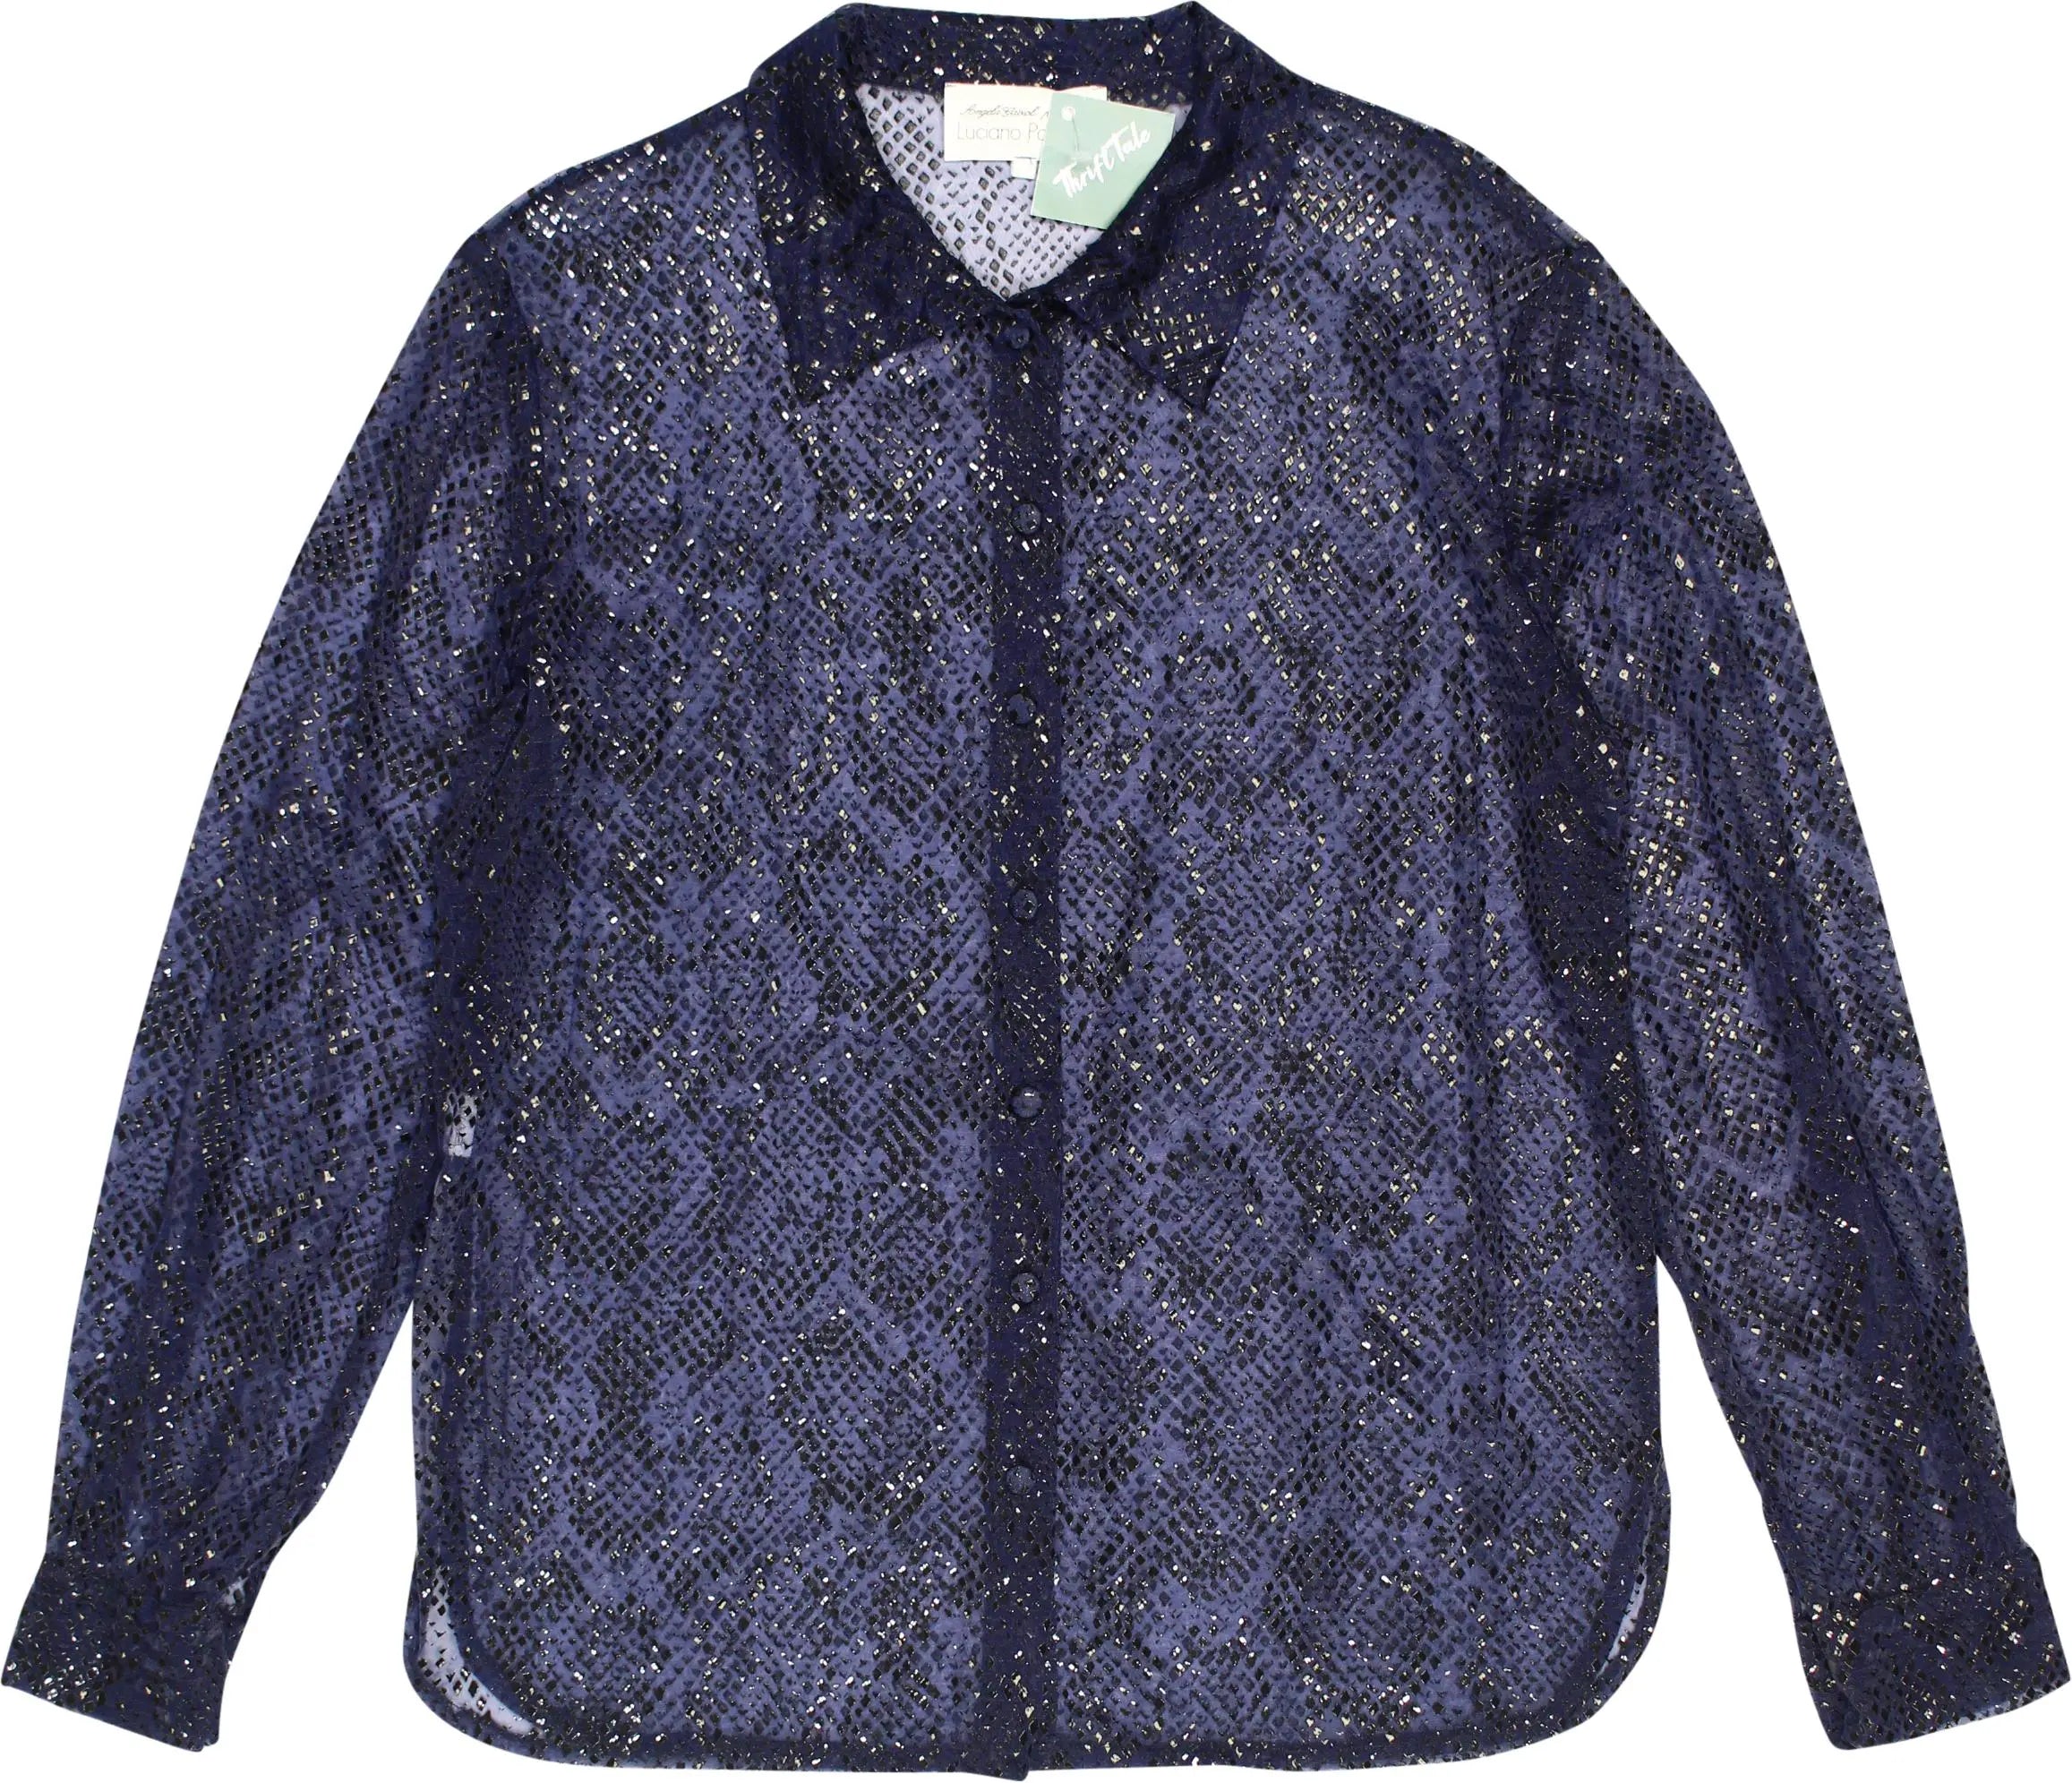 Luciano Pavarotti - Seethrough Shirt with Foil Print Details- ThriftTale.com - Vintage and second handclothing